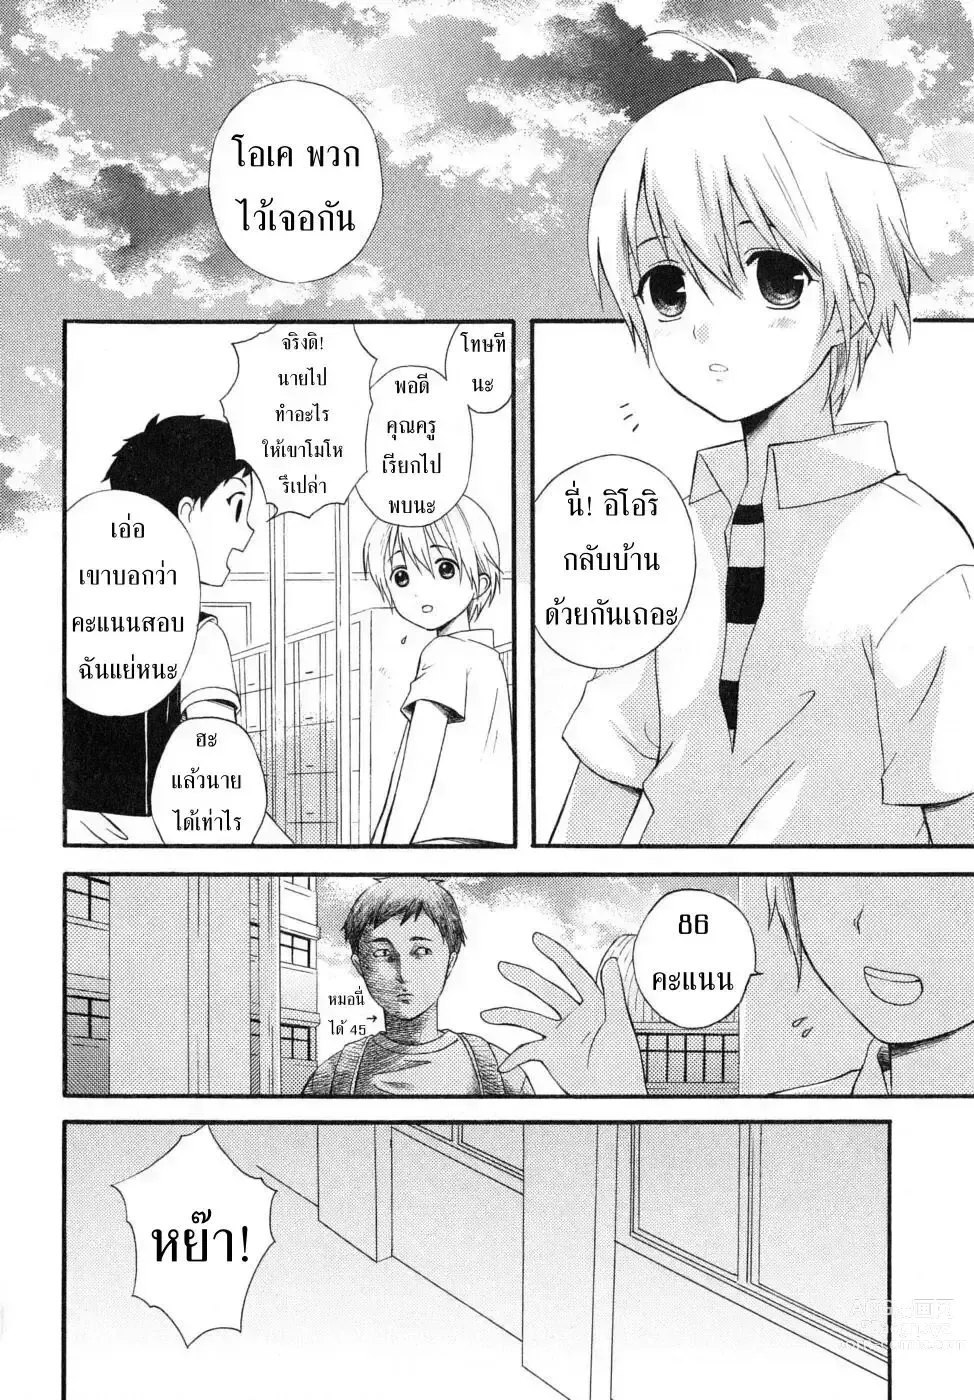 Page 2 of manga แอบมองเธออยู่นะจ๊ะ